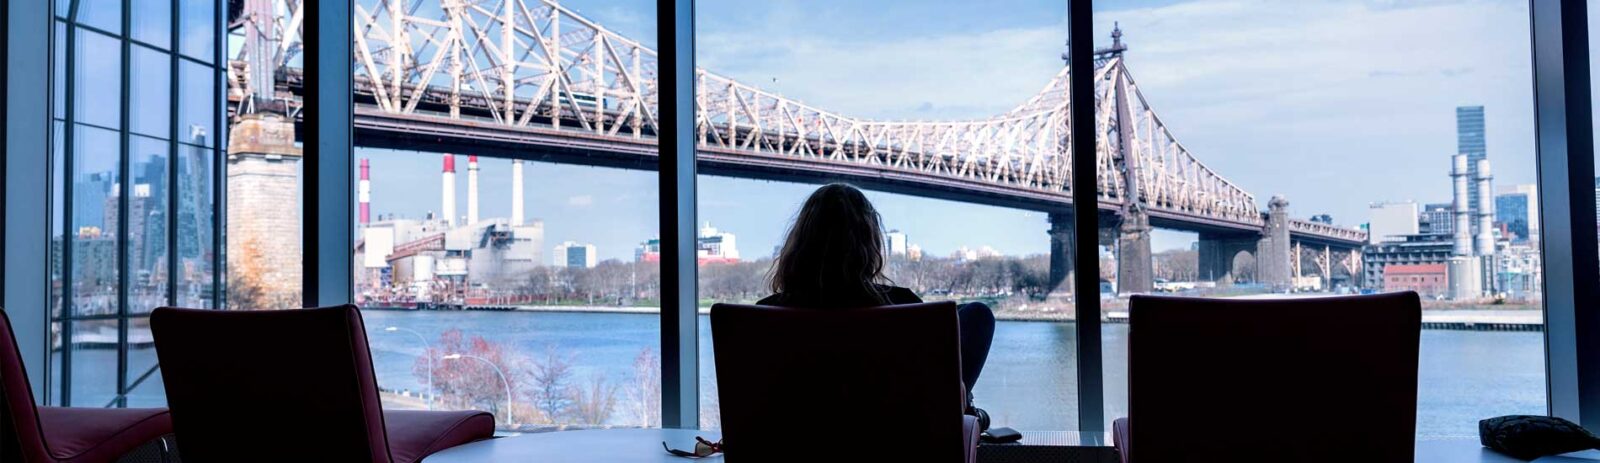 A person sits in a chair facing a window where a river and bridge are visible.